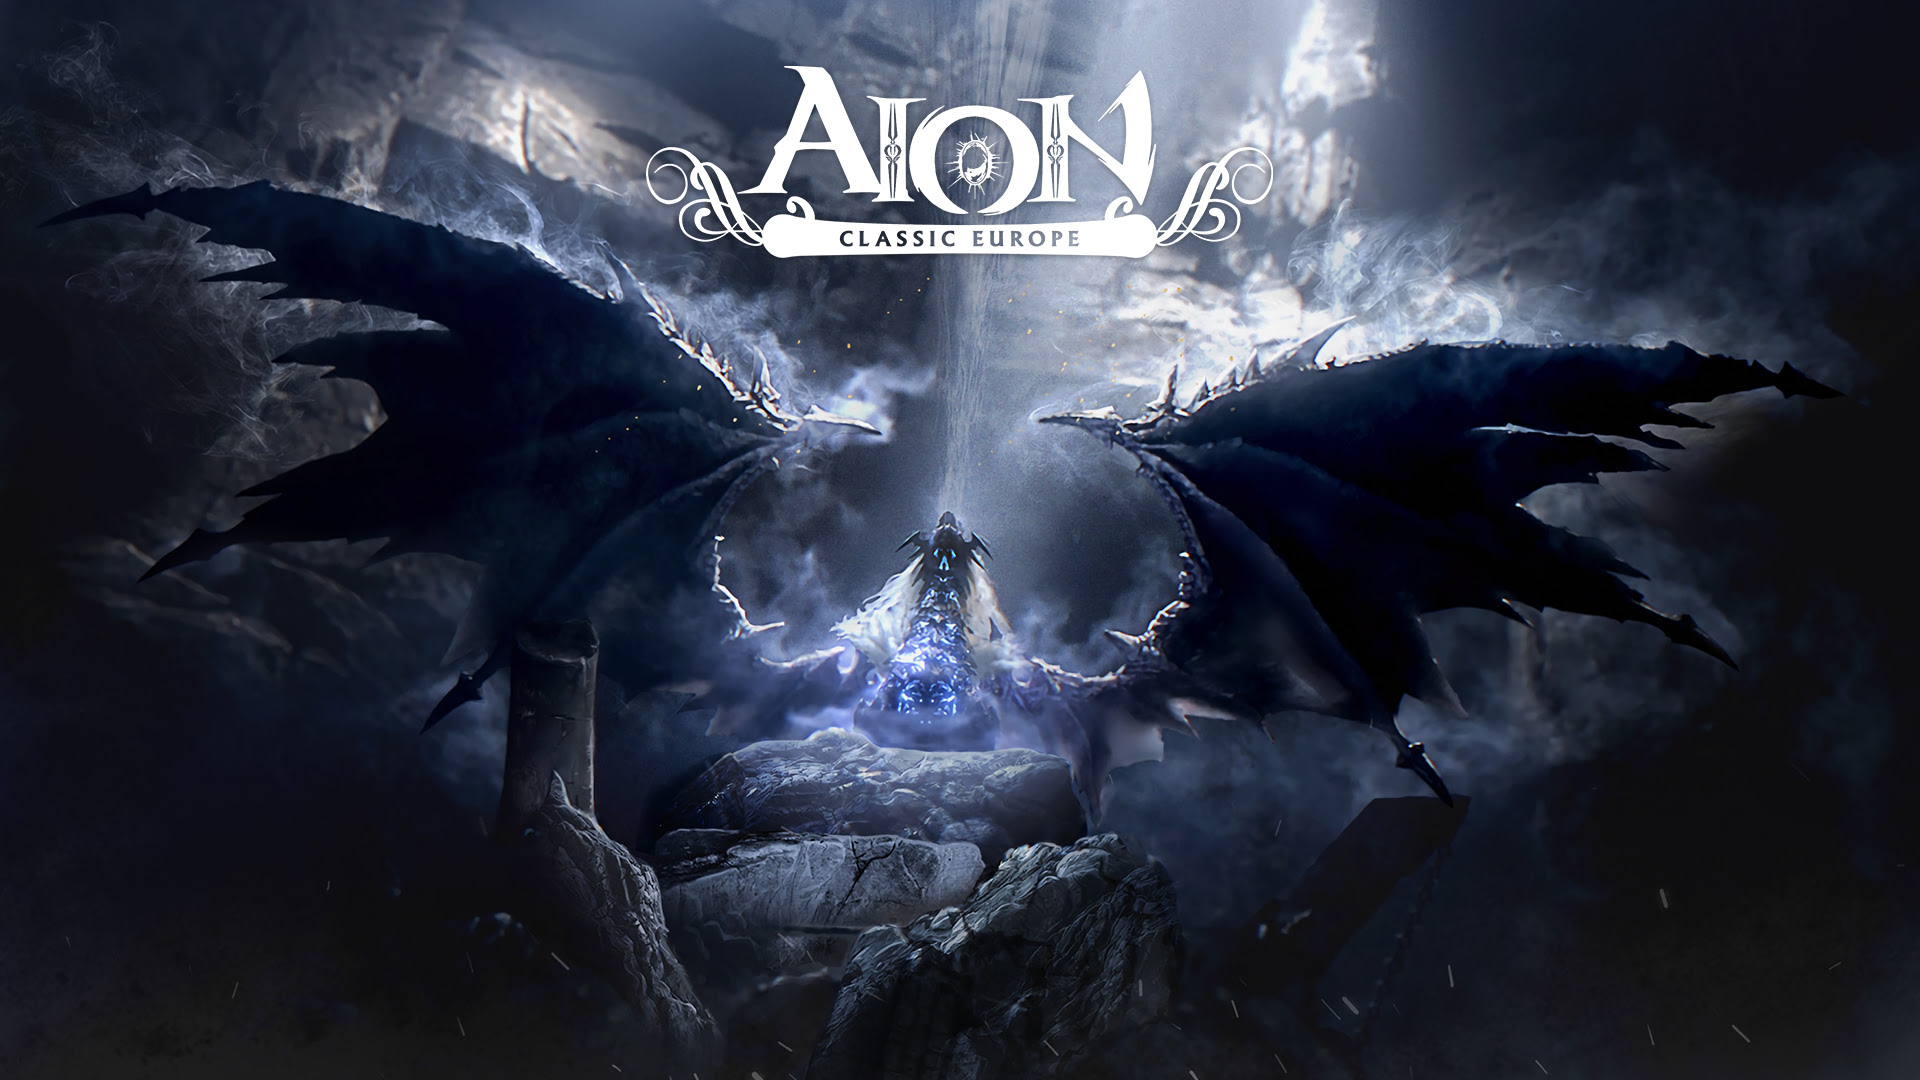 AION Classic Receives Major Expansion in Update 2.4 “Stormwing’s Revenge”!